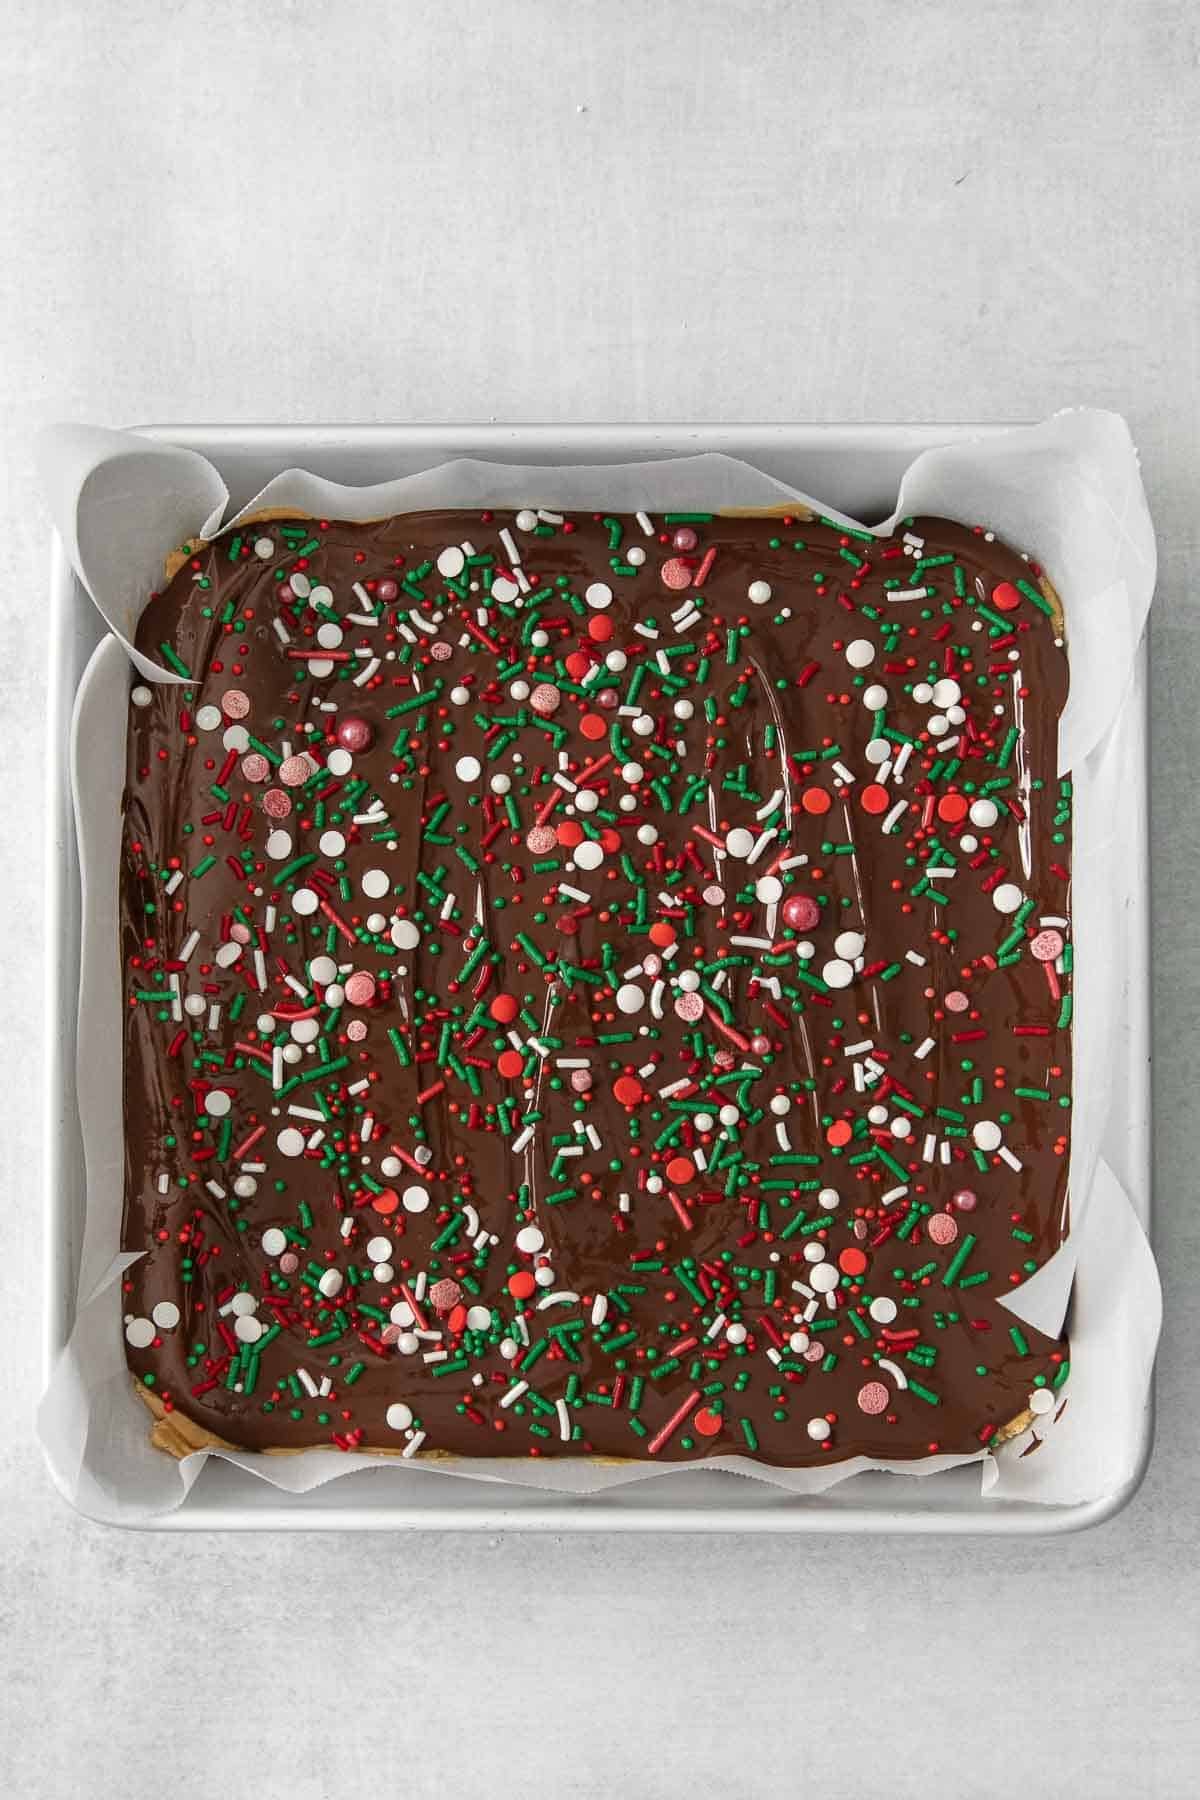 square metal baking dish with chocolate spread over a peanut butter mixture and topped with red, green and white sprinkles.